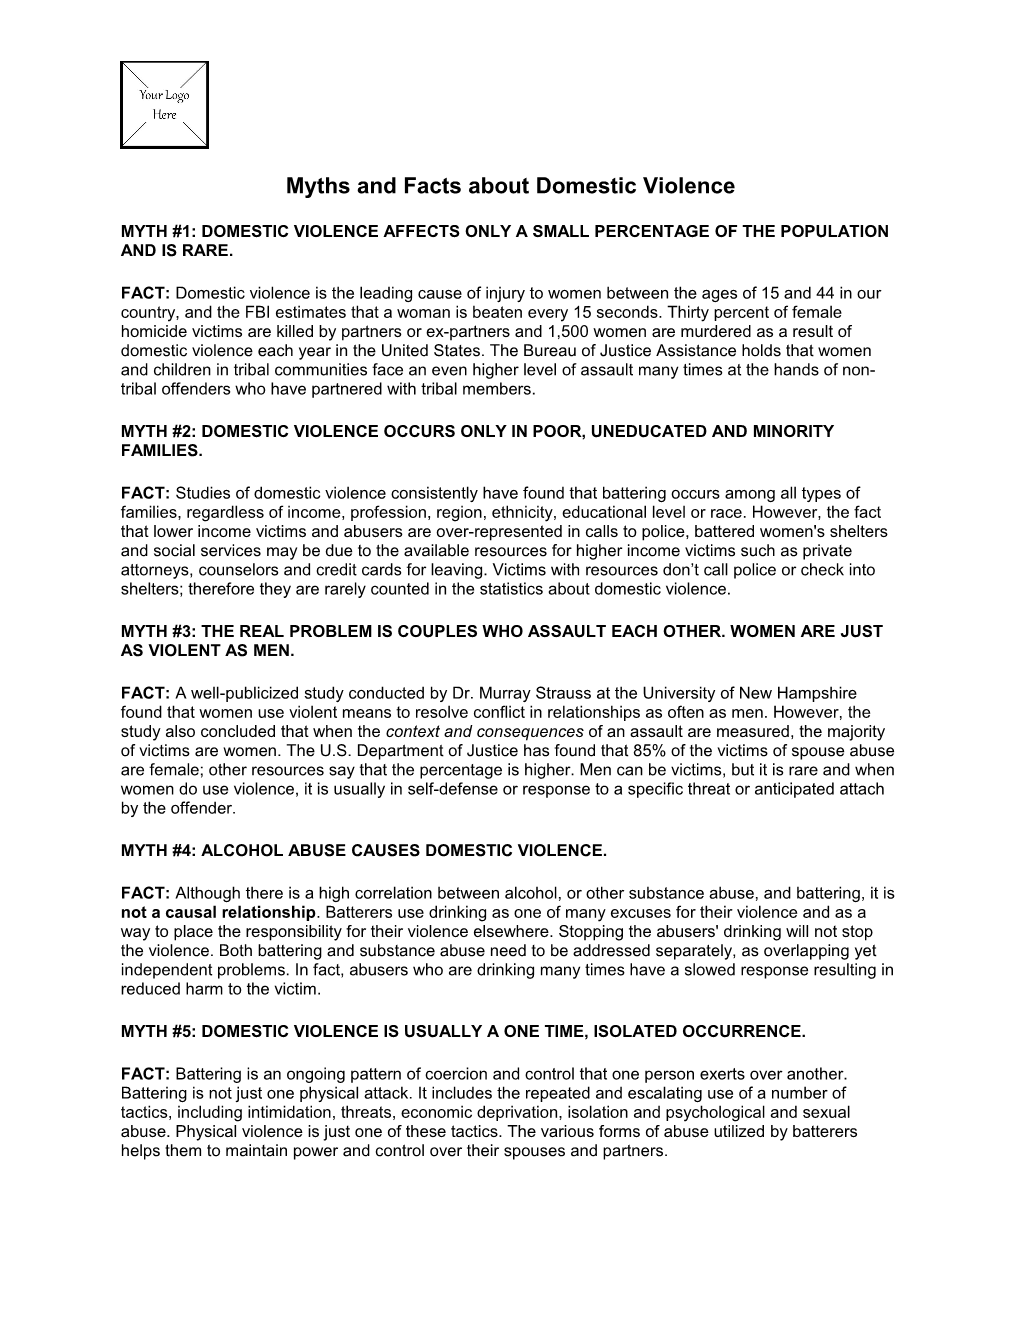 Myths and Facts About Domestic Violence